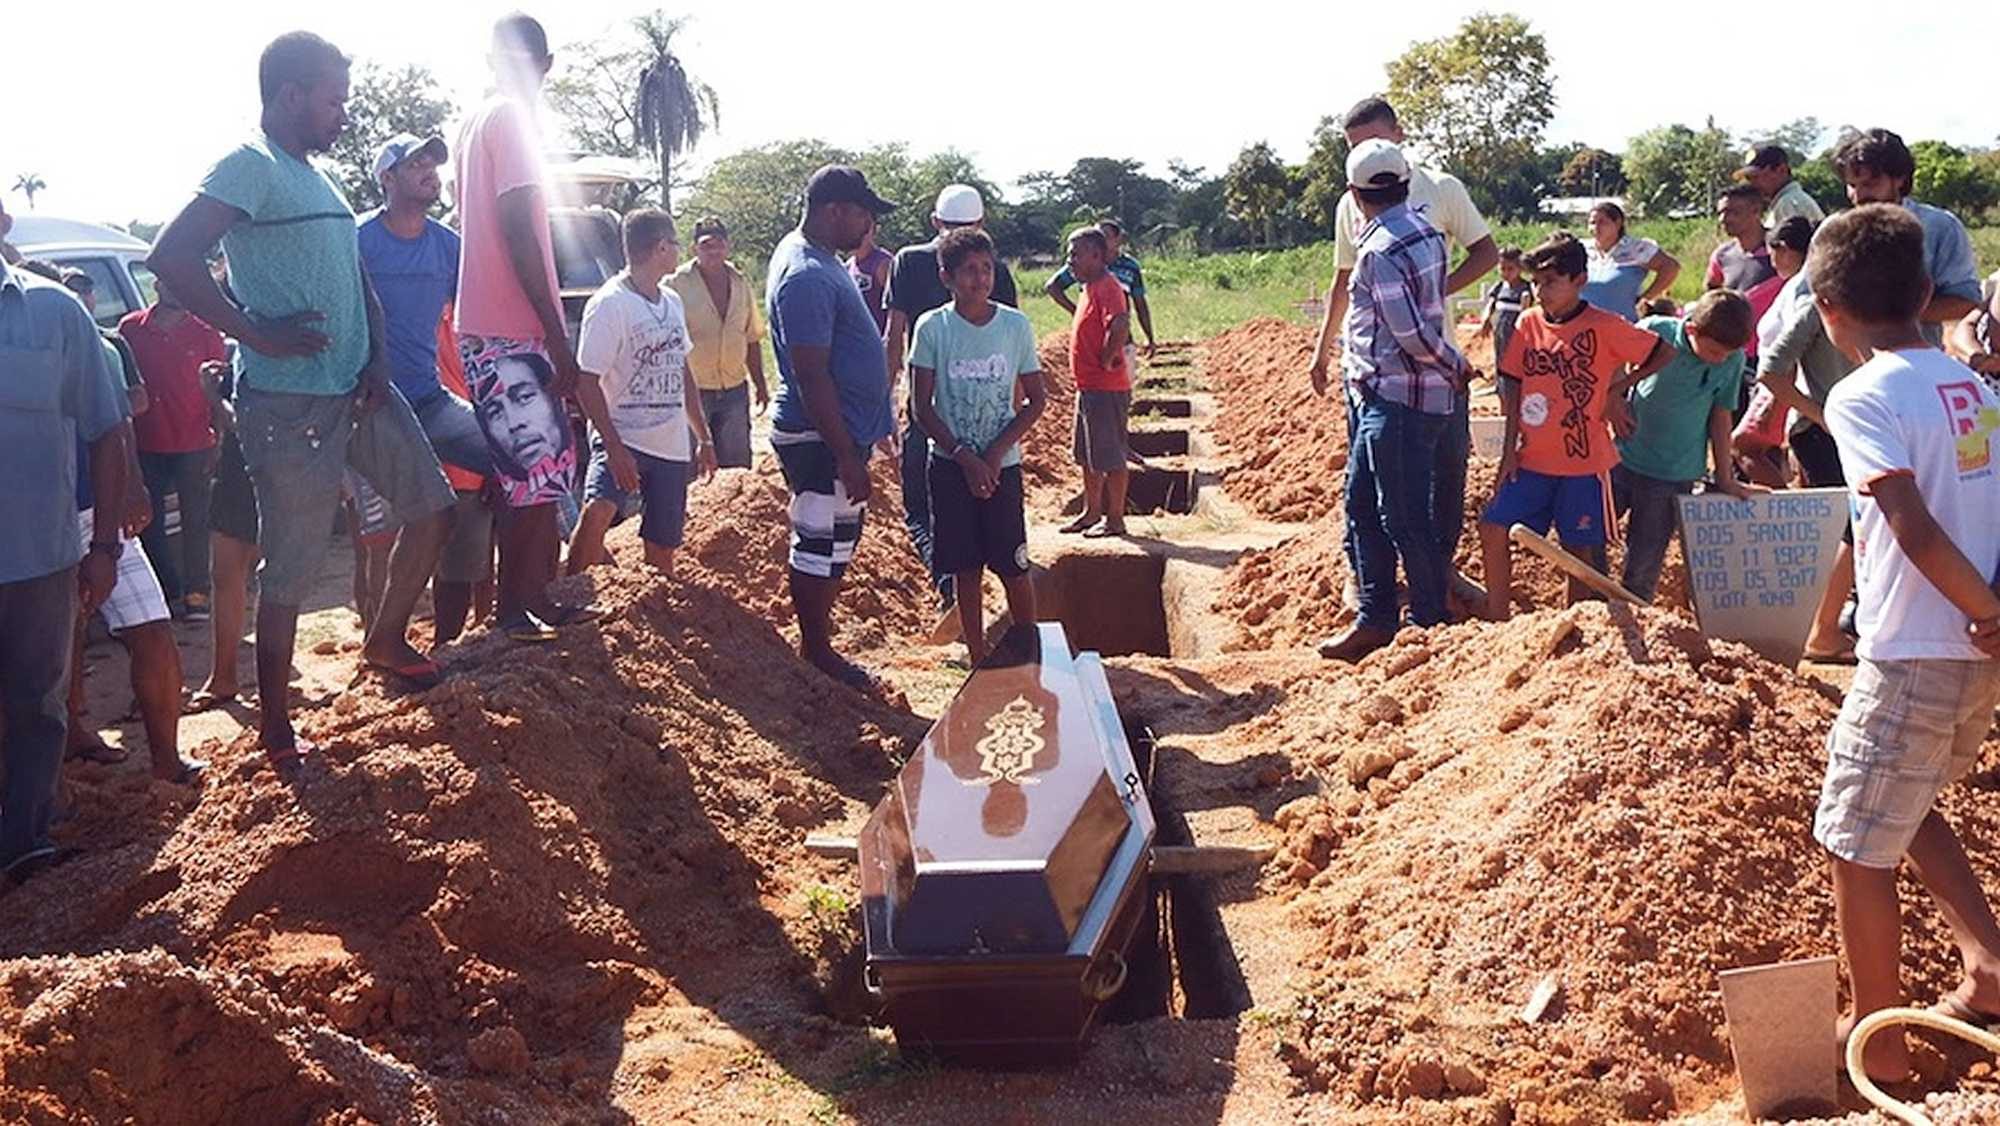 Victims of the massacre get buried in close-by graves - Photo: Dinho Santos